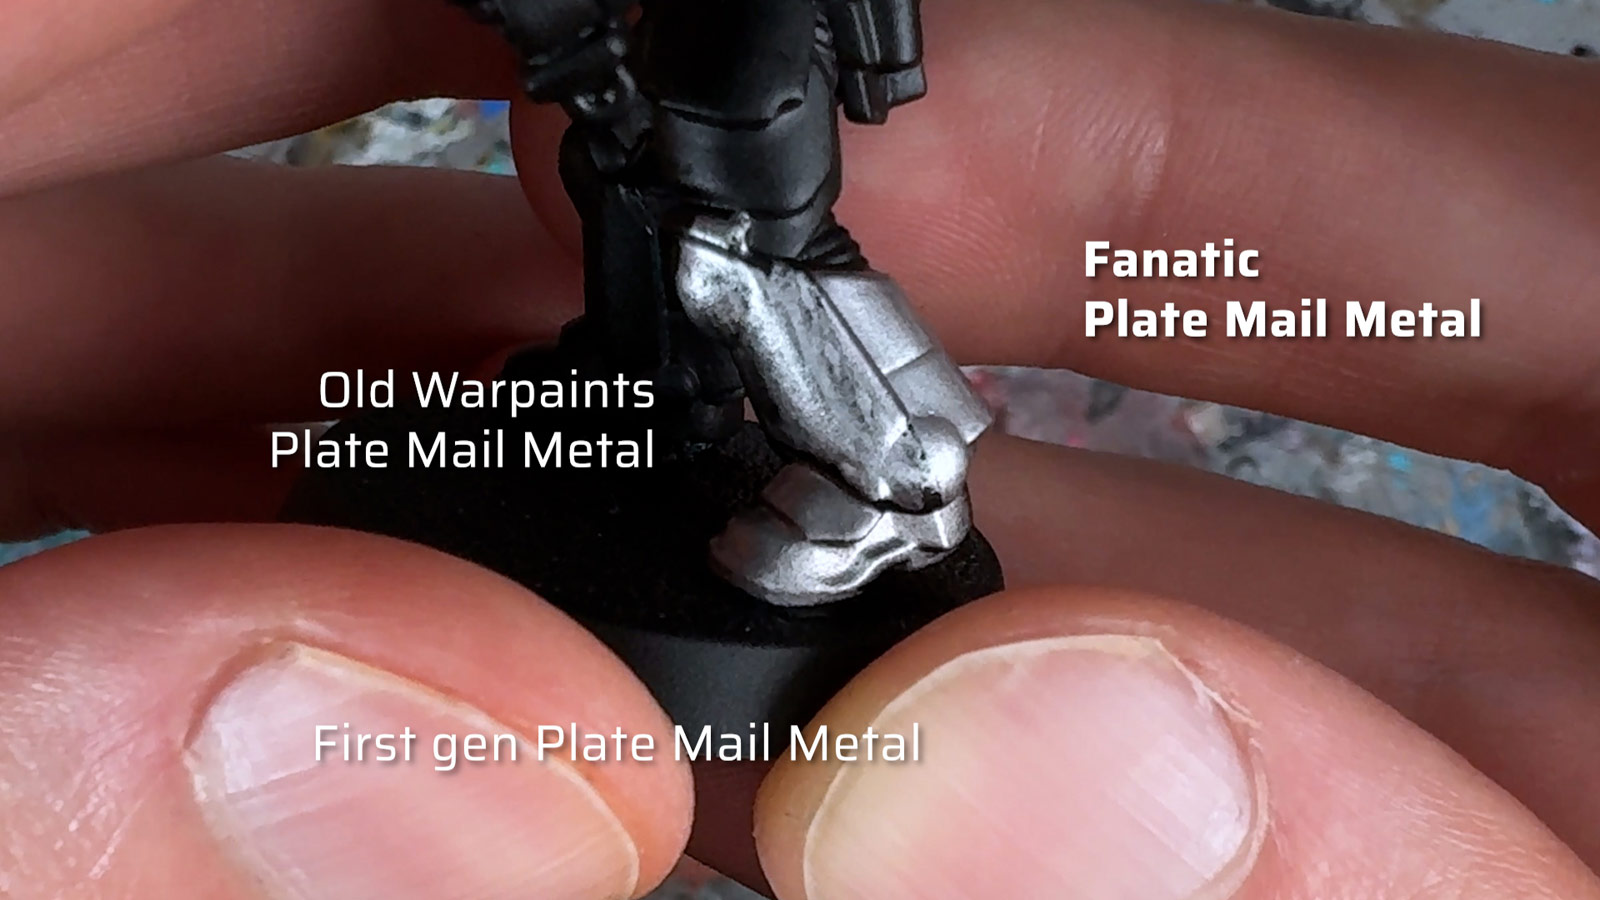 The Army Painter Warpaints Fanatic Plate Mail Metal old and new comparison